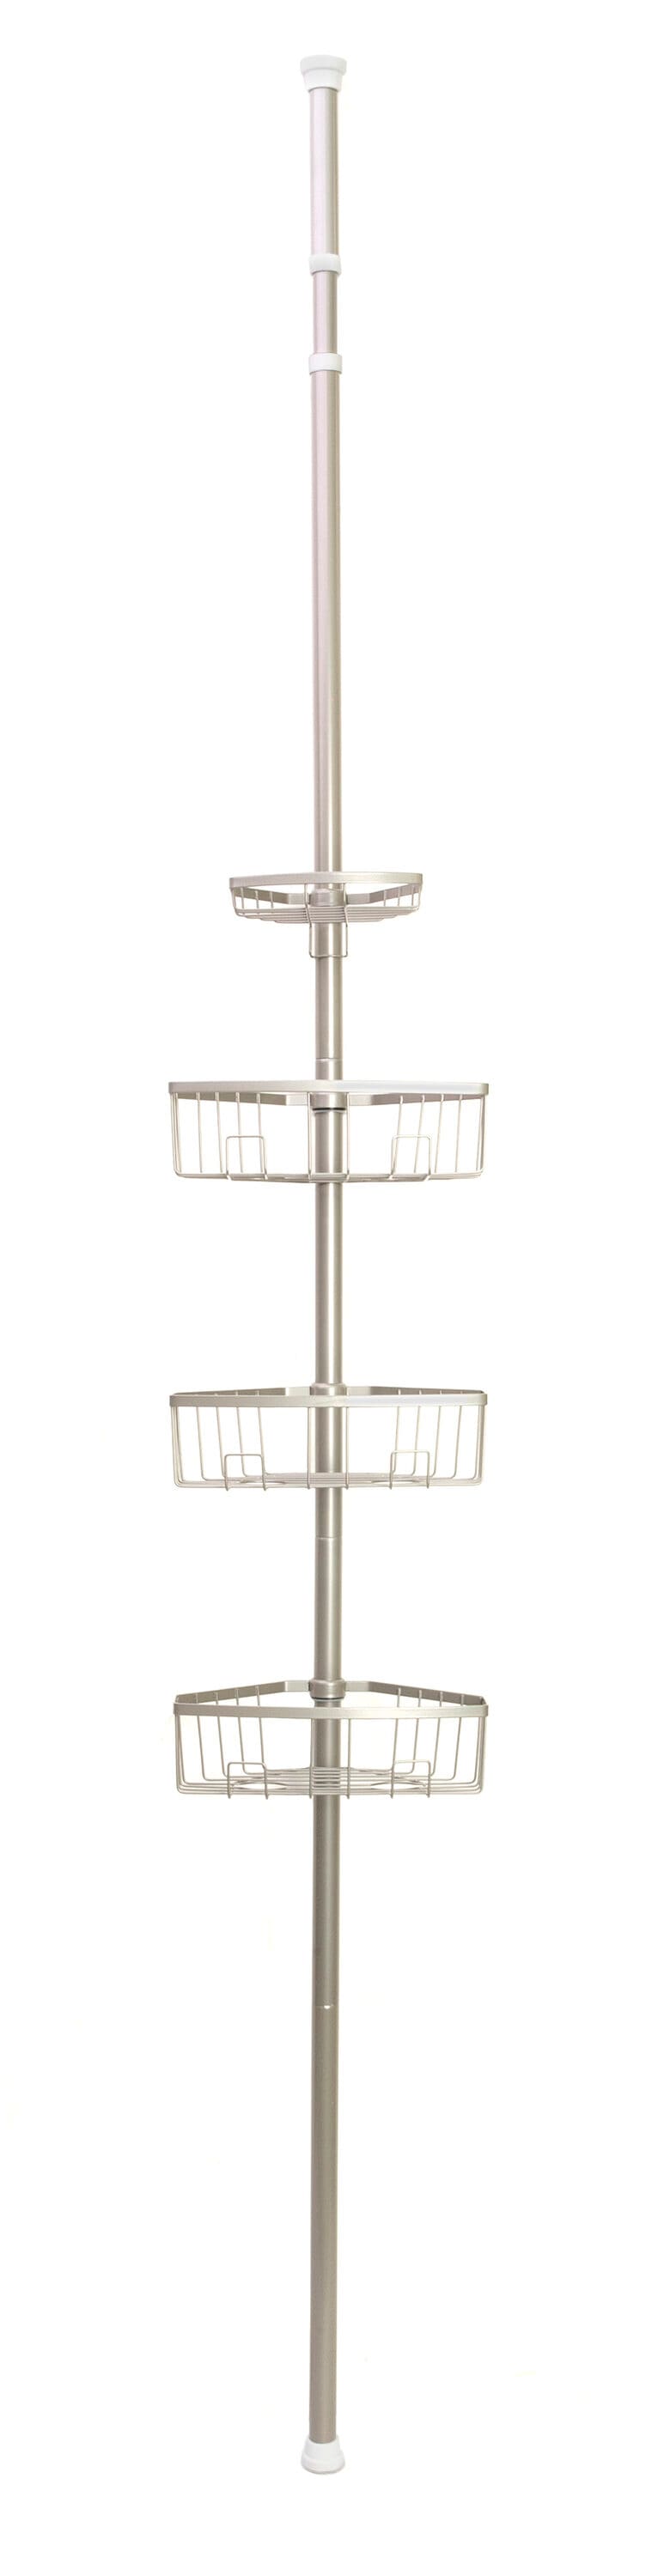 Style Selections Satin Nickel Steel 2-Shelf Hanging Shower Caddy 12-in x  5.1-in x 25.5-in in the Bathtub & Shower Caddies department at